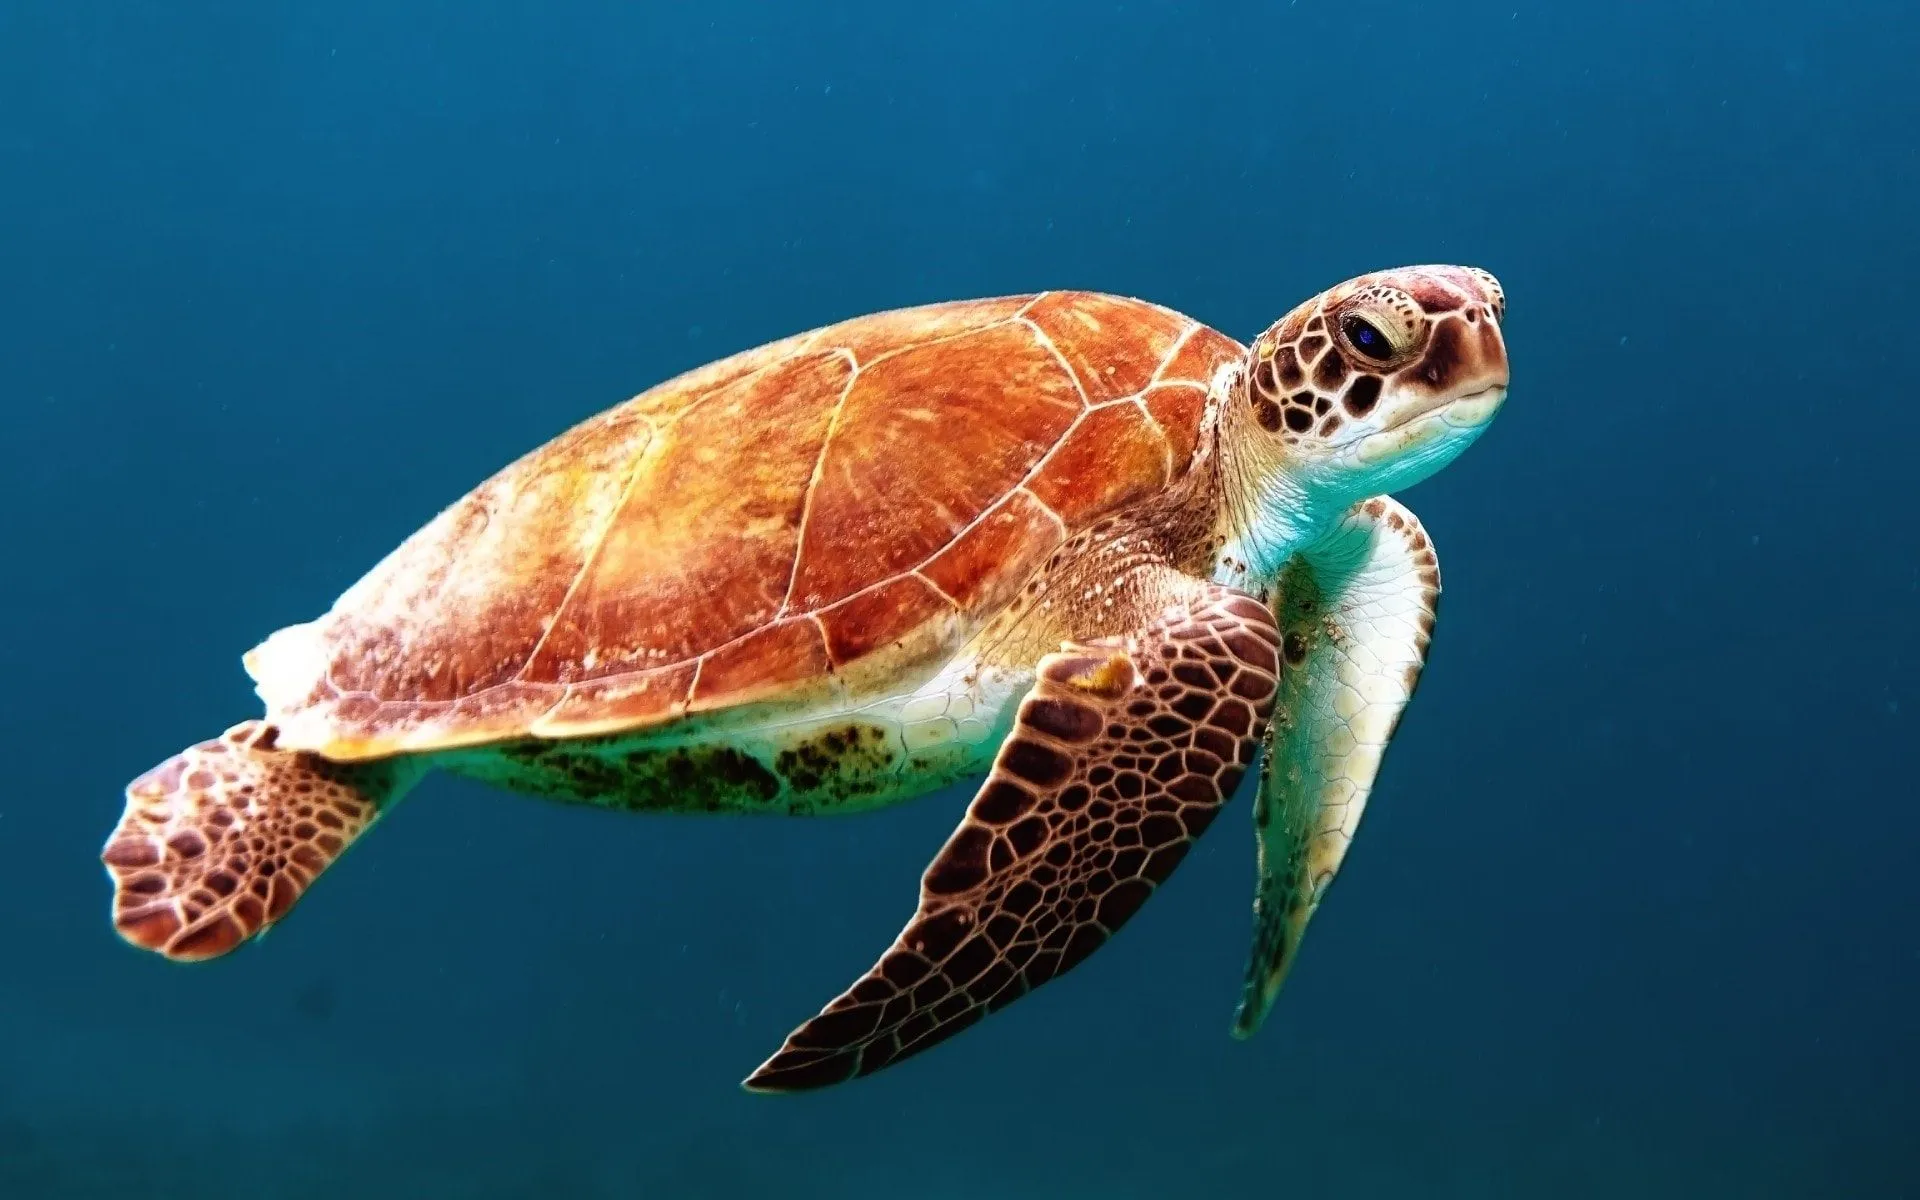 Cute names for turtles could include names like Sheldon, Harry, Squirtle, and Michelangelo.